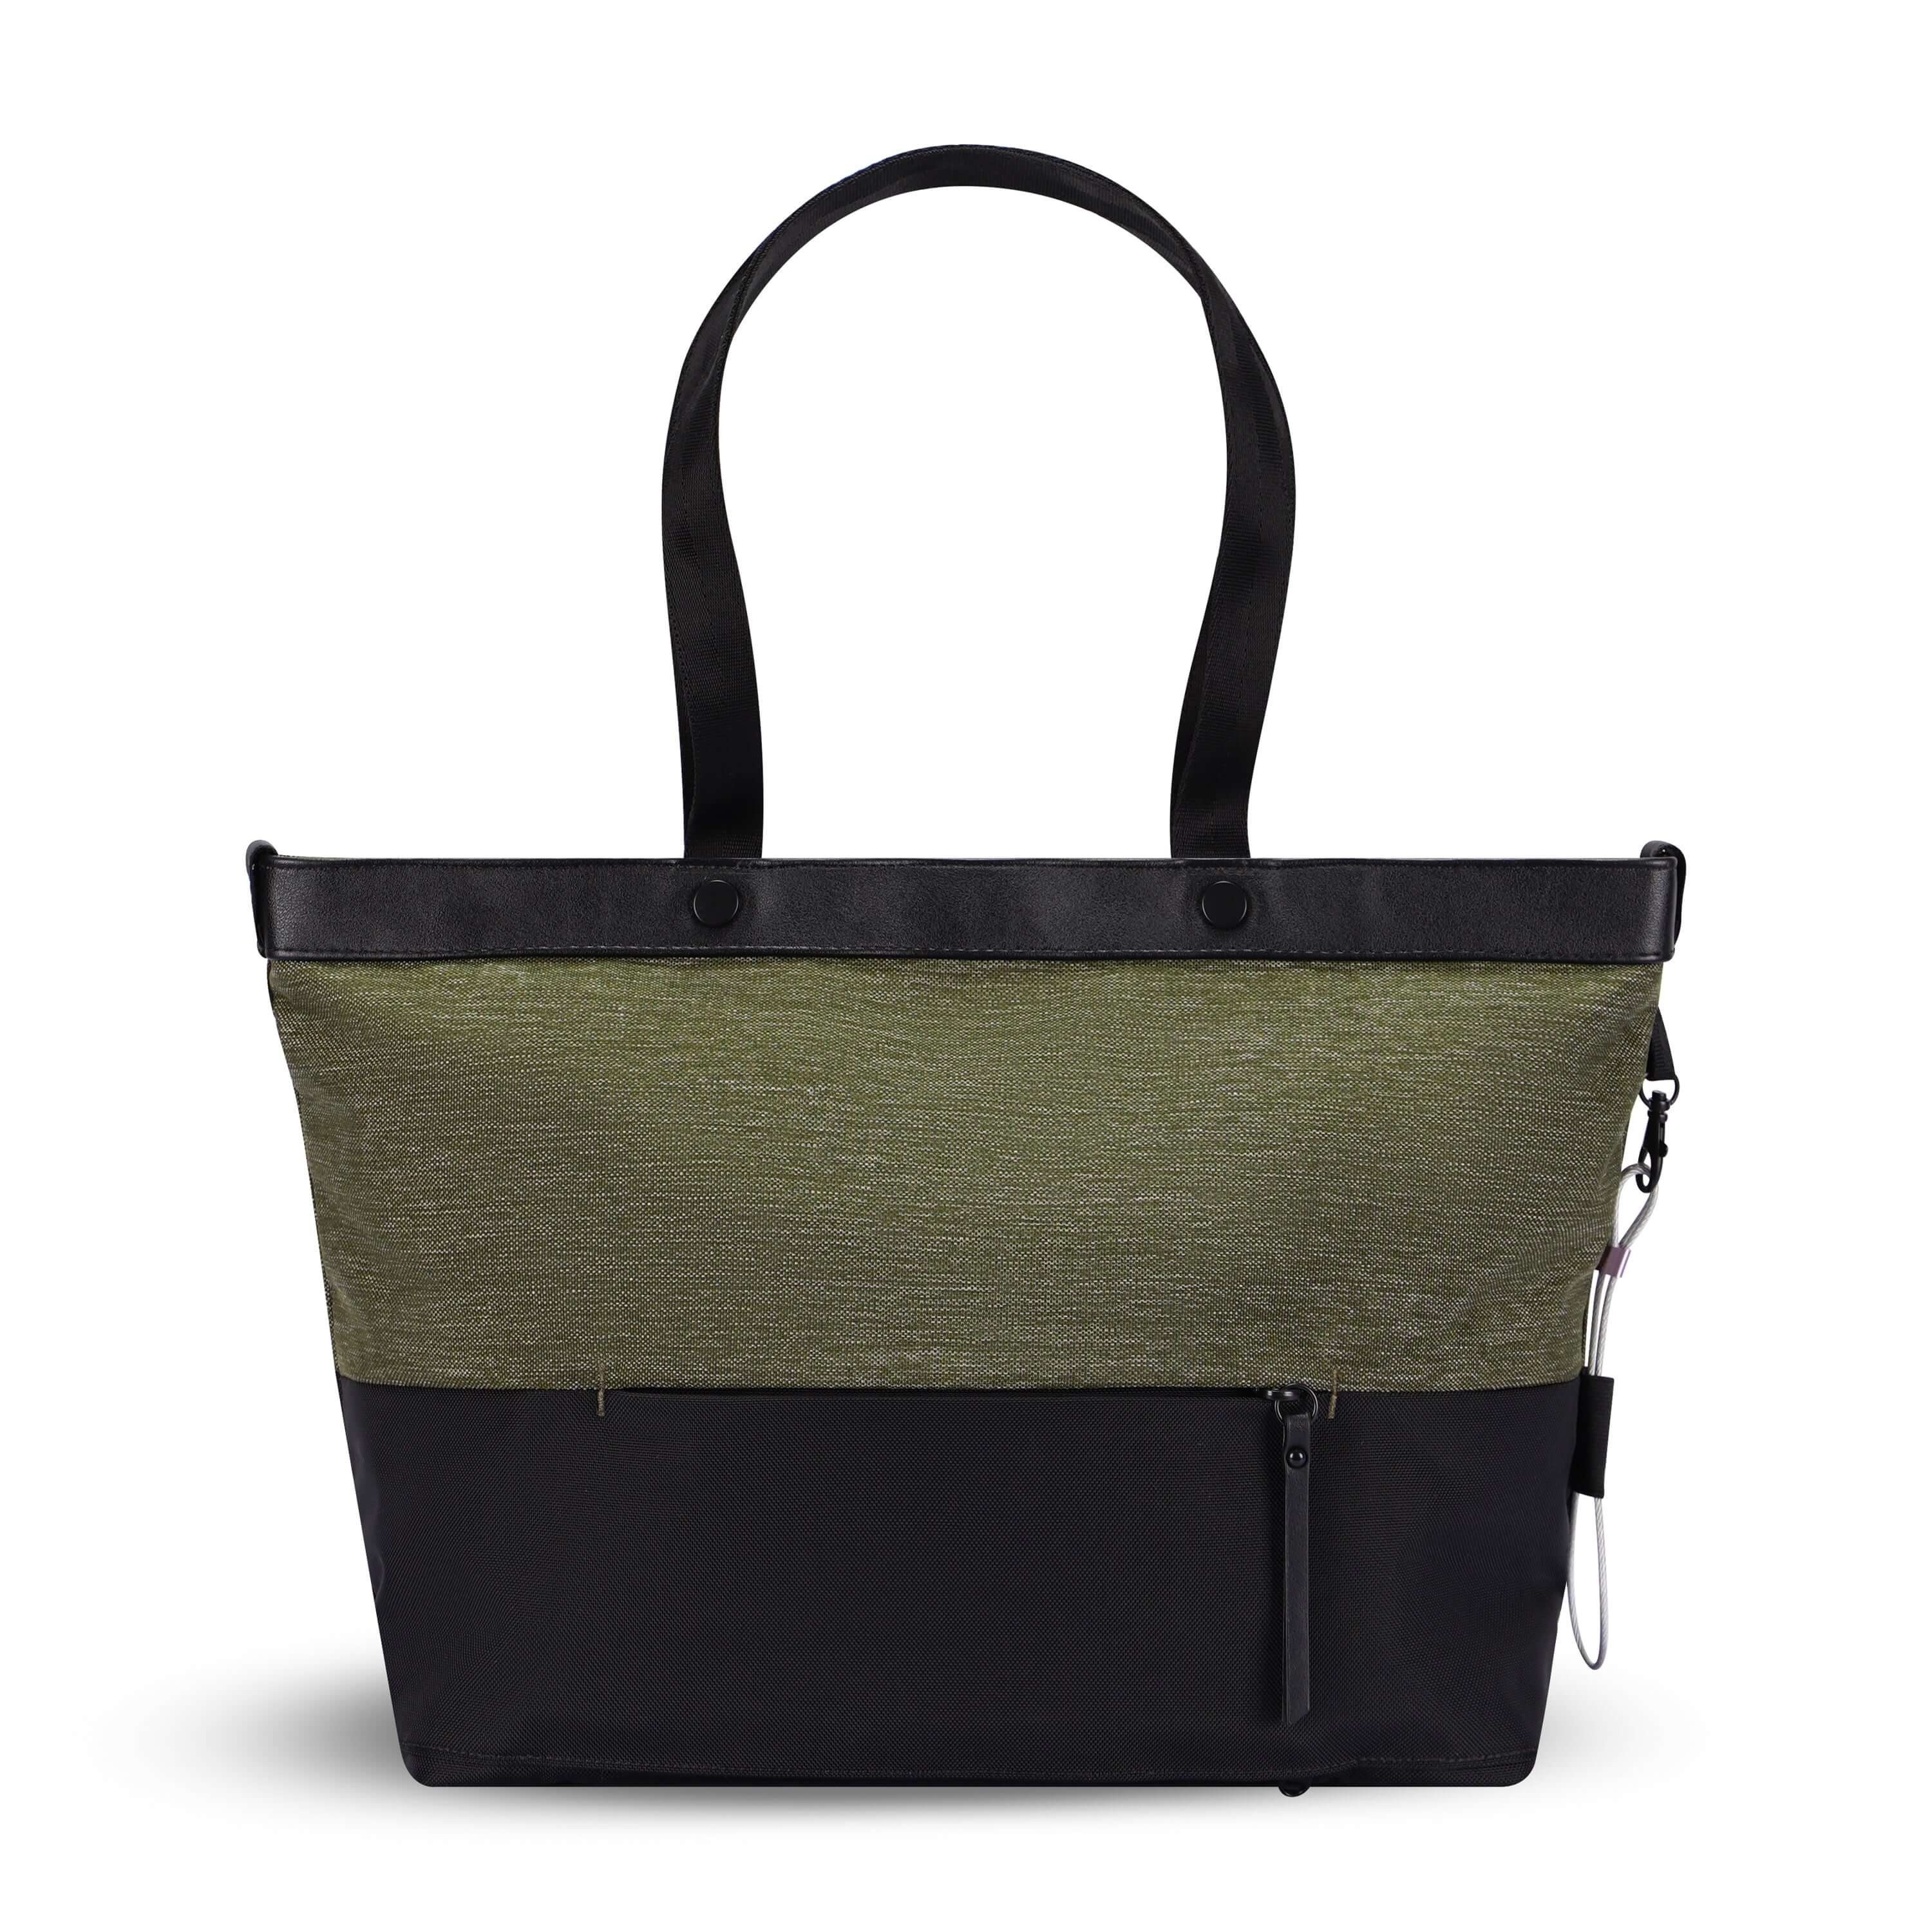 Back view of Sherpani&#39;s Anti-Theft tote, the Cali AT in Loden, with vegan leather accents in black. There is a zipper compartment that acts as a luggage pass-through or trolley sleve, and a chair loop lock on one side that is secured by an elastic tab.